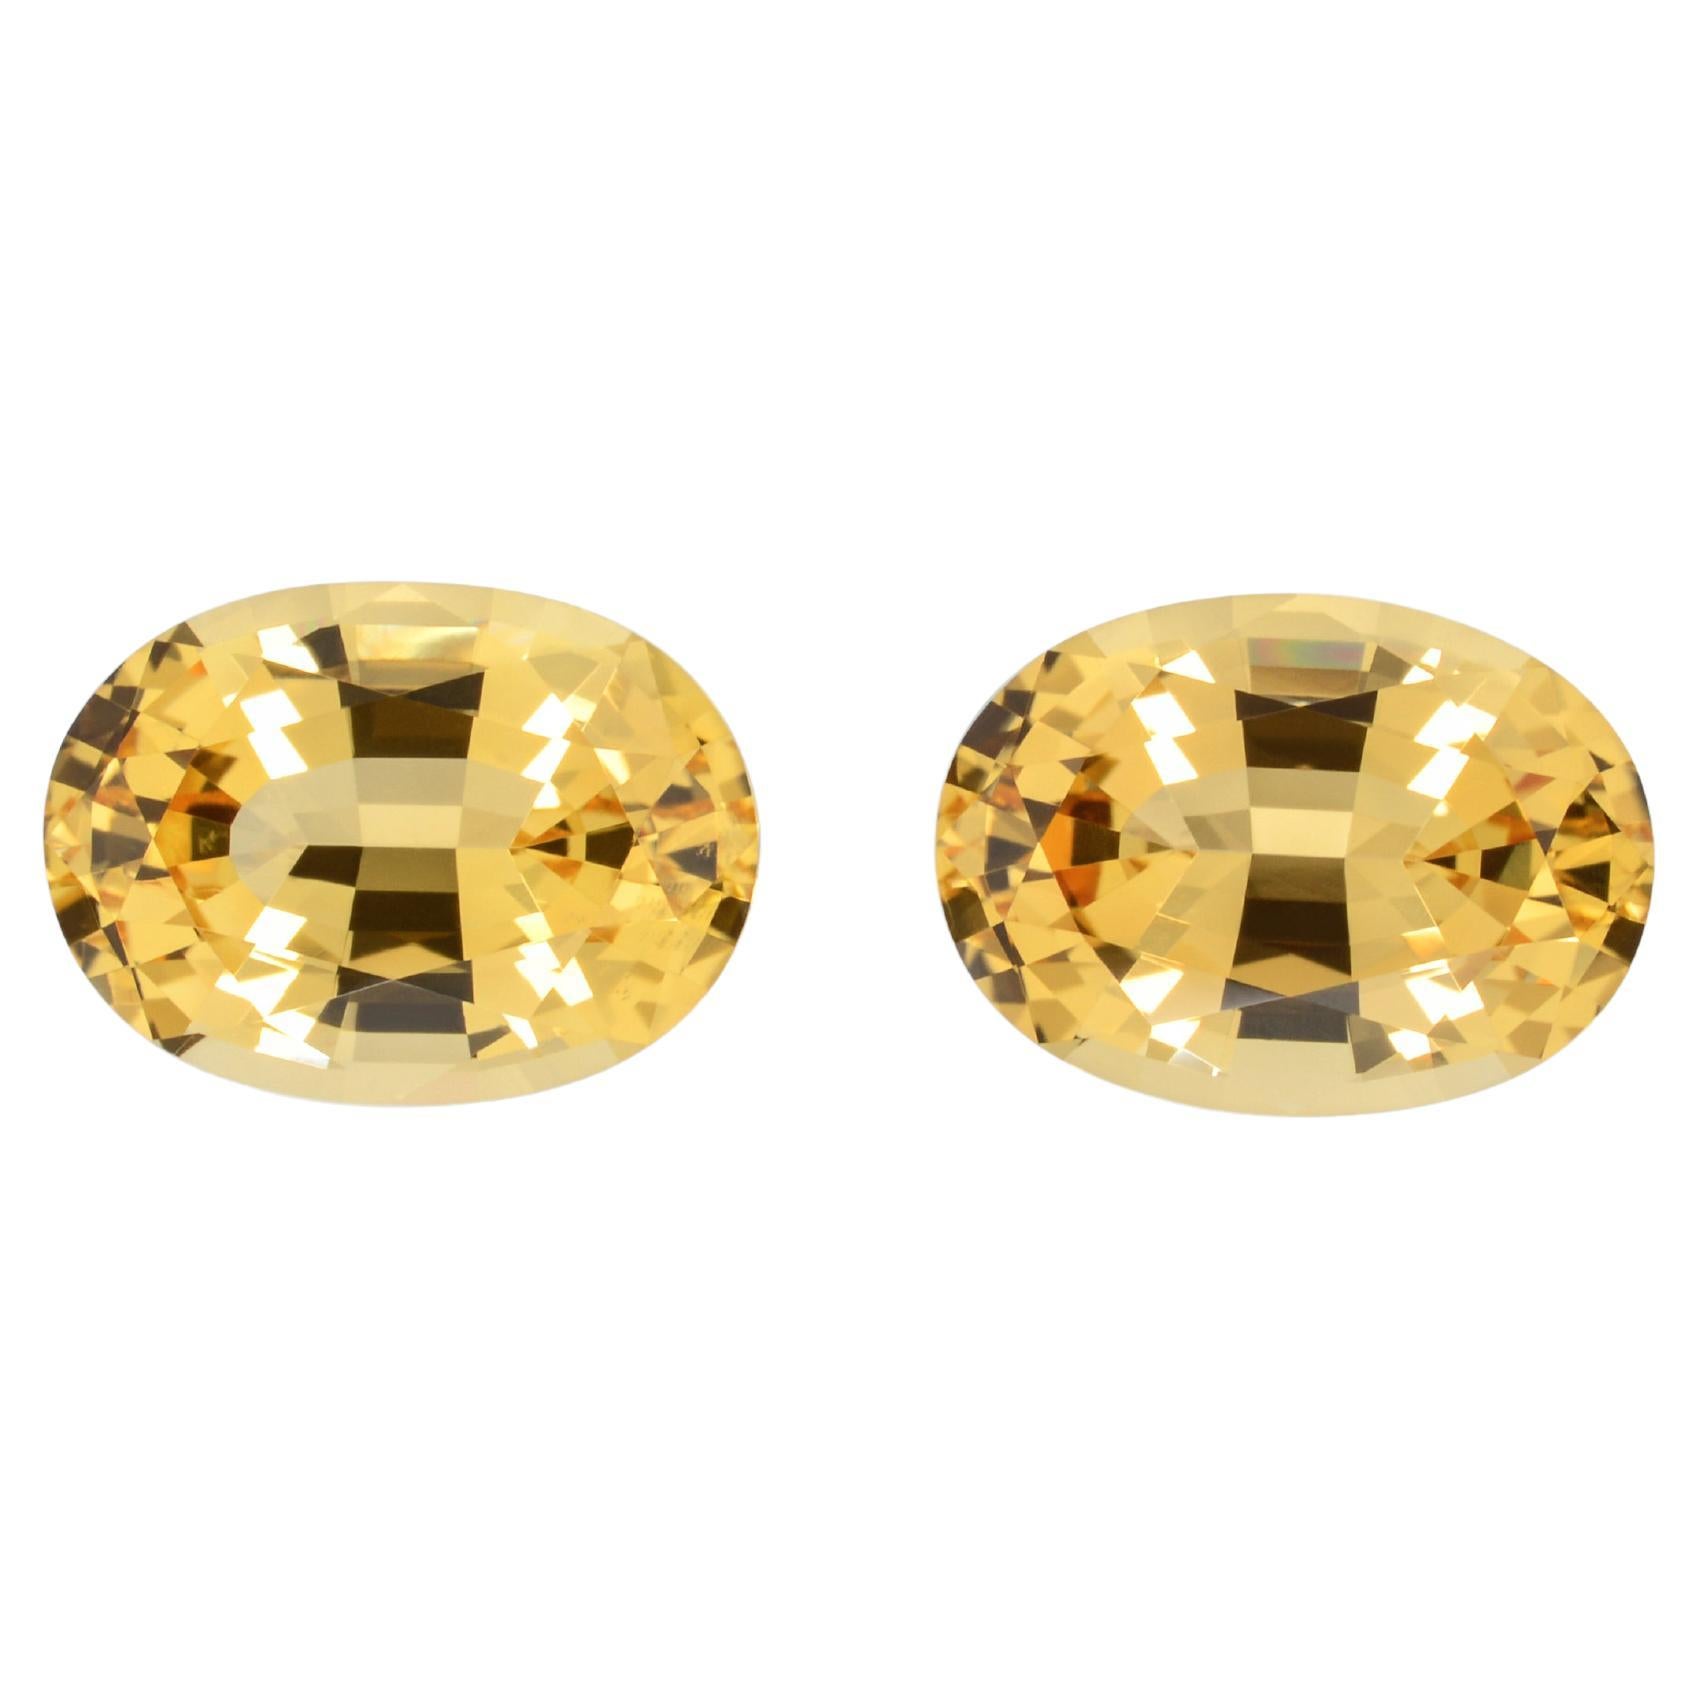 Imperial Topaz Earring Gemstones 8.26 Carats Oval Brazilian Loose Gems For  Sale at 1stDibs | imperial topaz earrings, 8.26 1.92, 5752 princess house